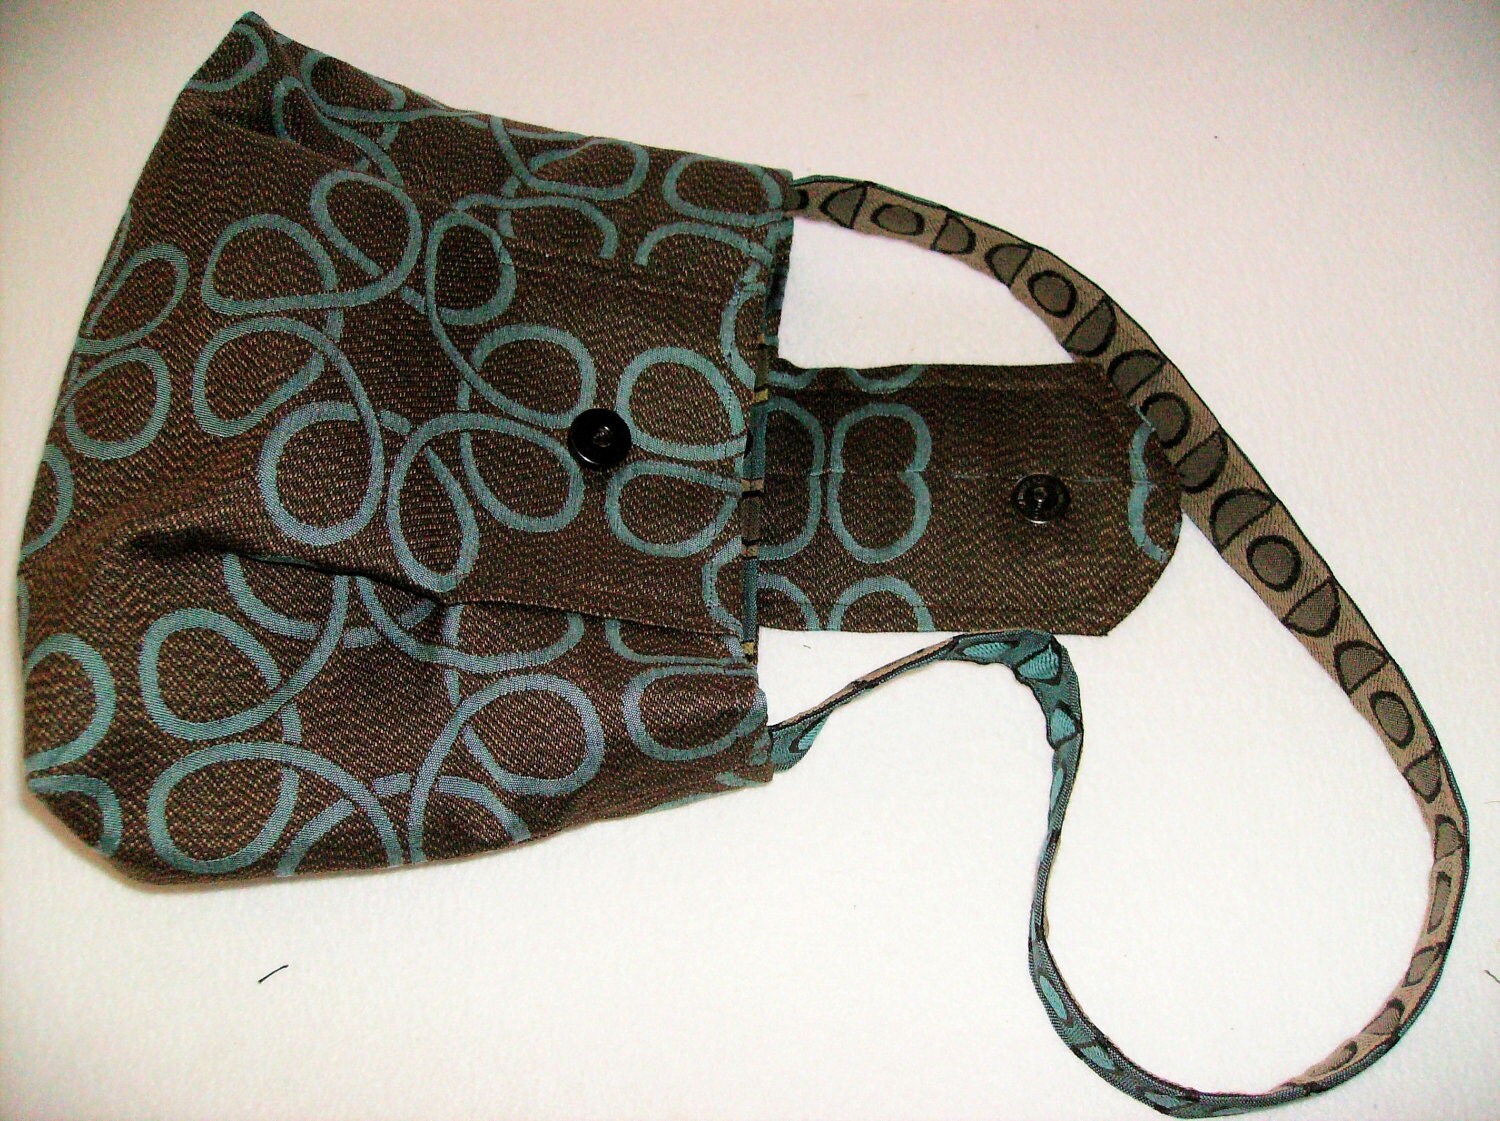 Items similar to Small handbag purse Irish Celtic Knot design fabric in teal blue and chocolate ...